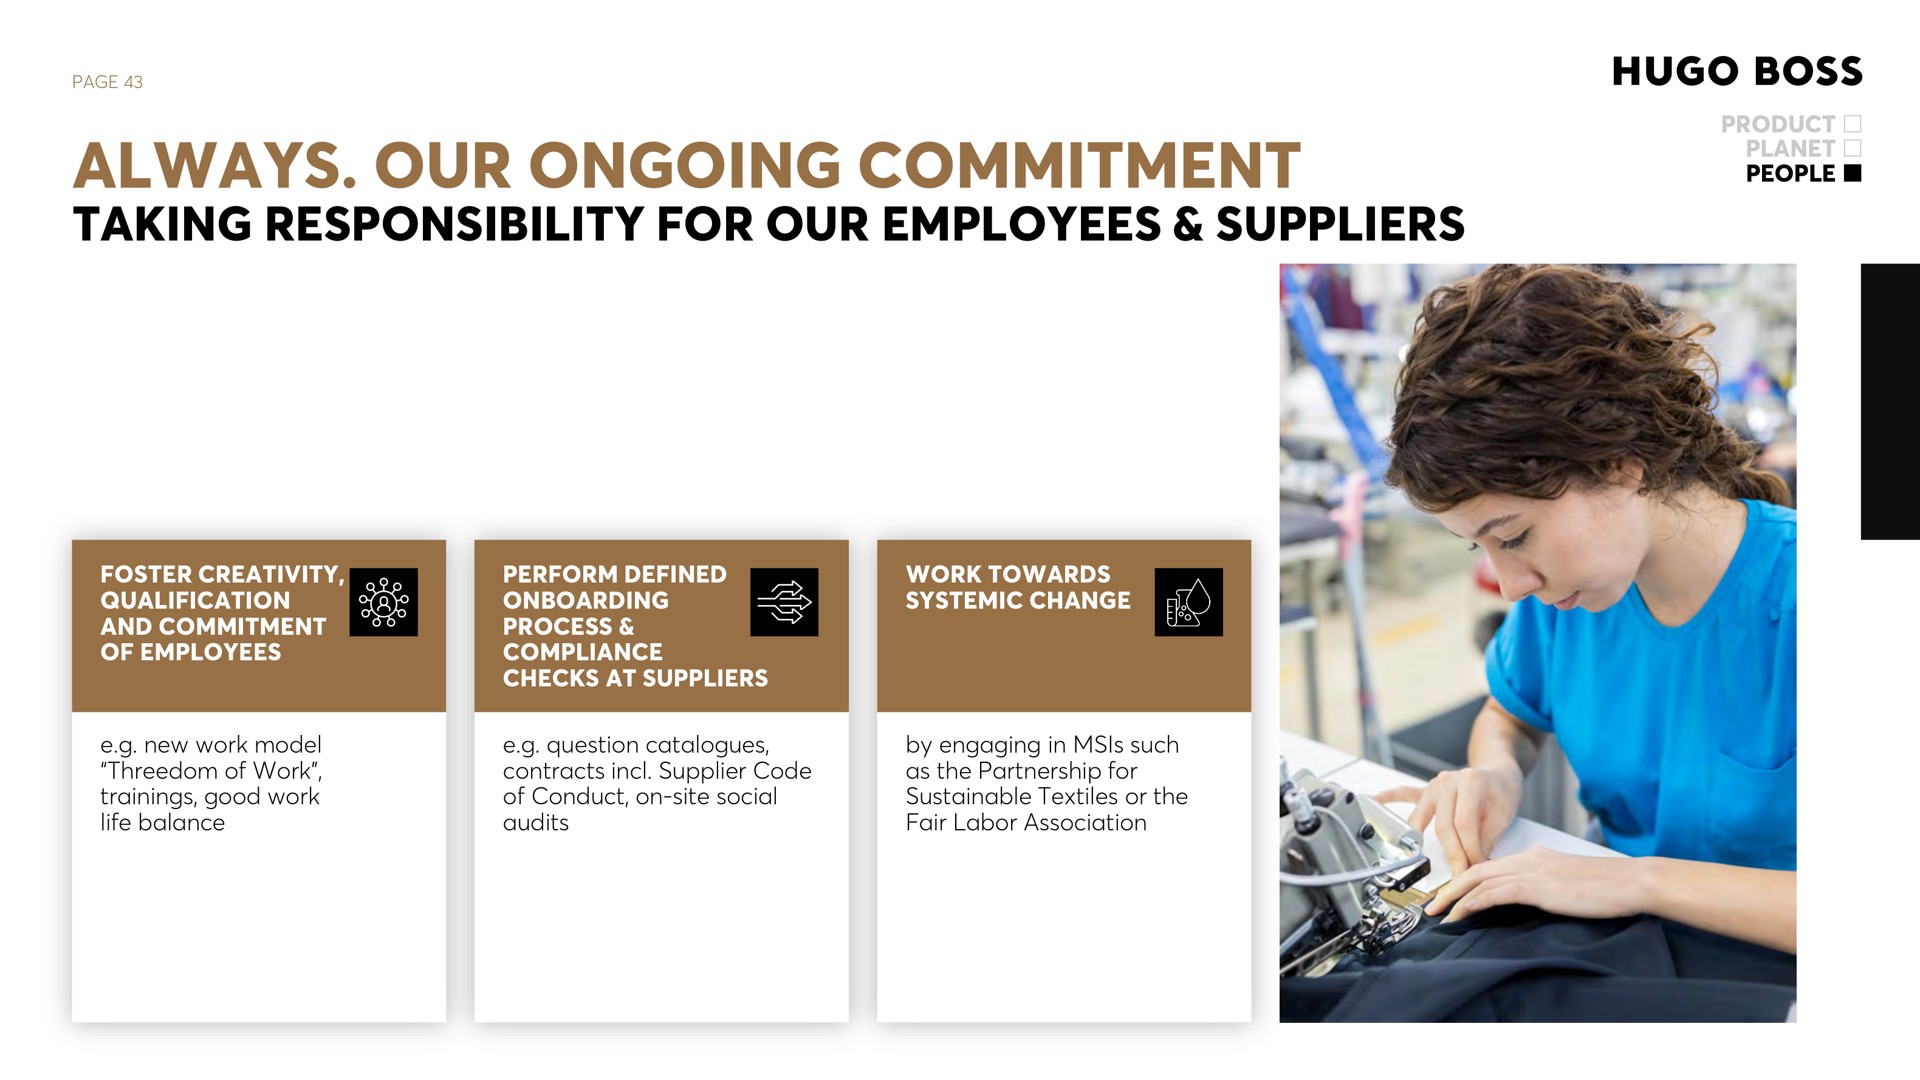 page always our ongoing commitment taking responsibility for our employees suppliers product planet people foster creativity qualification and commitment of employees perform defined process compliance checks at suppliers work towards systemic change new work model of work trainings good work life balance question catalogues contracts supplier code of conduct on site social audits by engaging in such as the partnership for sustainable textiles or the fair labor association | Hugo Boss